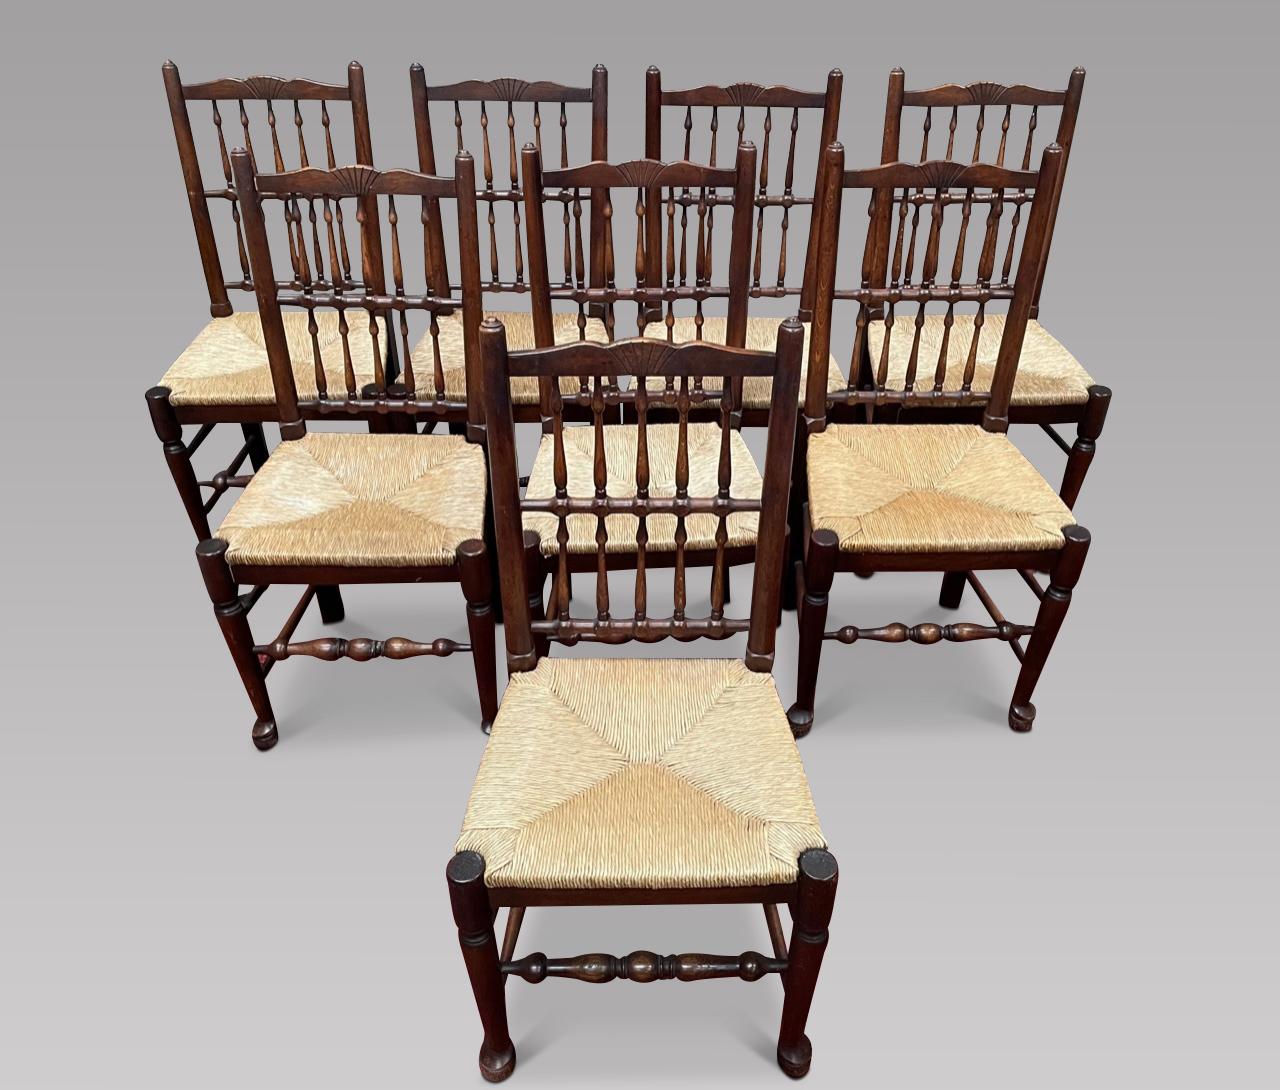 A Set of Eight Elm Spindleback chairs in very good order, with drop-in rush seats, on turned legs joined by stretchers,

Measures: Height Back 96.5 cm, Width 48 cm, Depth Seat 38.5 cm and Seat Height 47 cm.